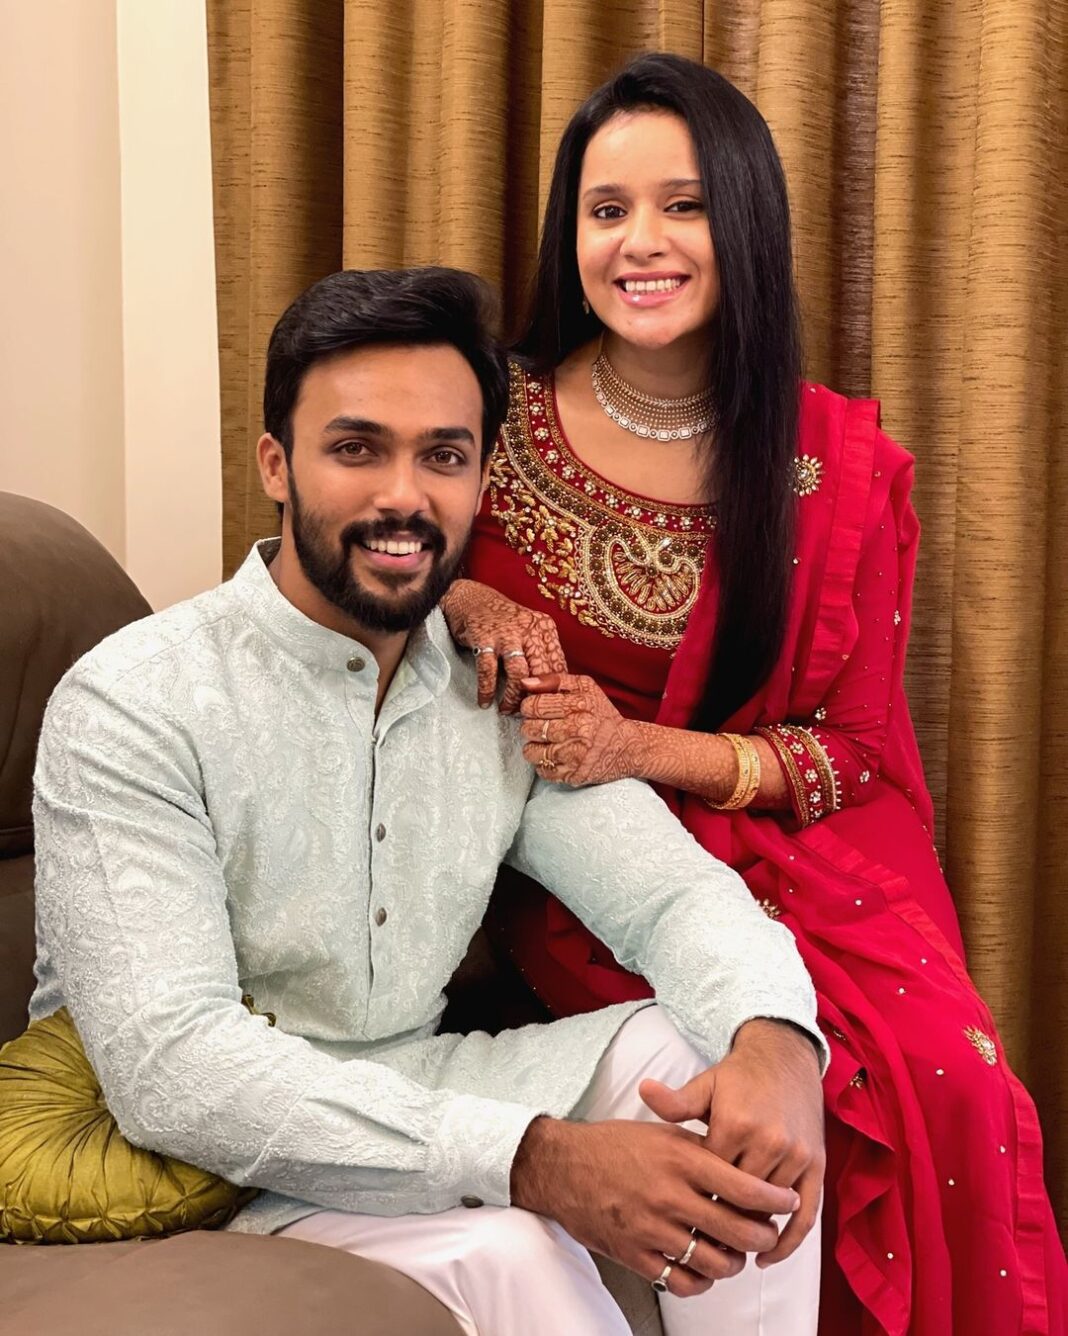 Arav Instagram - Heartiest wishes to all to have a safe & peaceful #EidUlFitr. Hope the power of our prayers can restore hope in humanity, liberate all people from this #COVID19 pandemic situations and ease in any hardship that’s worrying us. Wishing everyone good health, safety, positivity and tranquillity. #EidMubarak from @raahei & me #aravraahei #eidmubarak2021 #eid #eidulfitr #spreadhumanity #humanity #peace #health #happiness #prayersforhealing #prayersfortheworld #eidpost #eidoutfit #eid2021